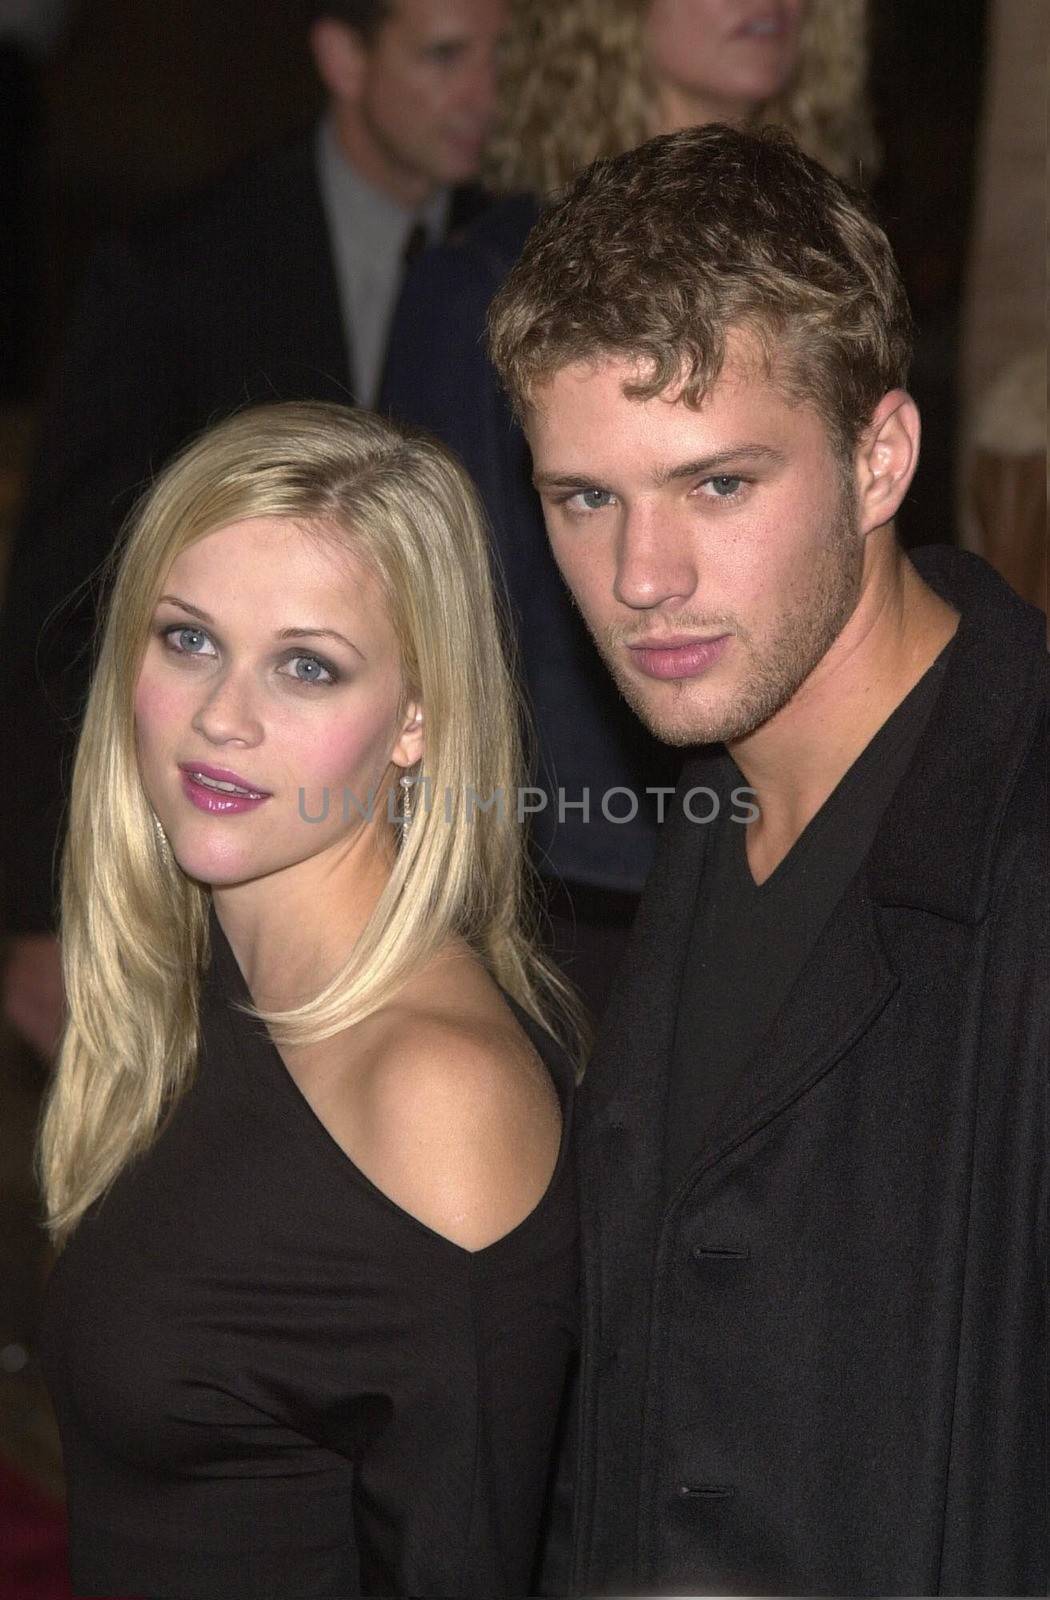 Reese Witherspoon and Ryan Phillippe at the premiere of The Way Of The Gun in Hollywood. 08-29-00